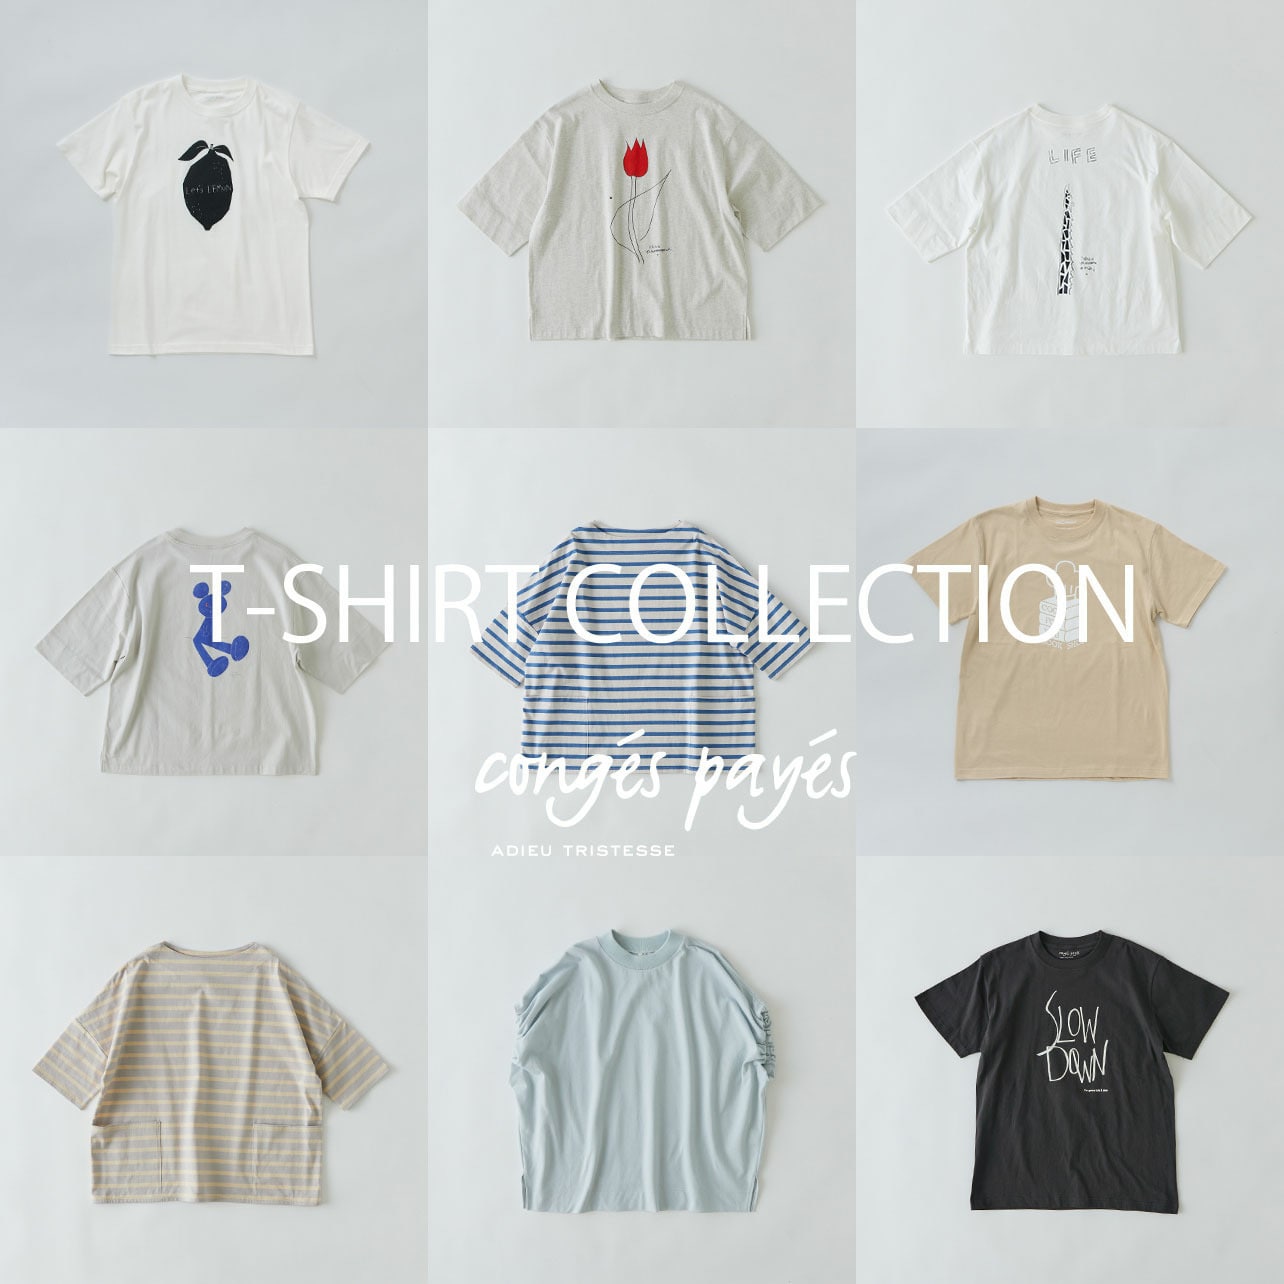  T-SHIRT Collection